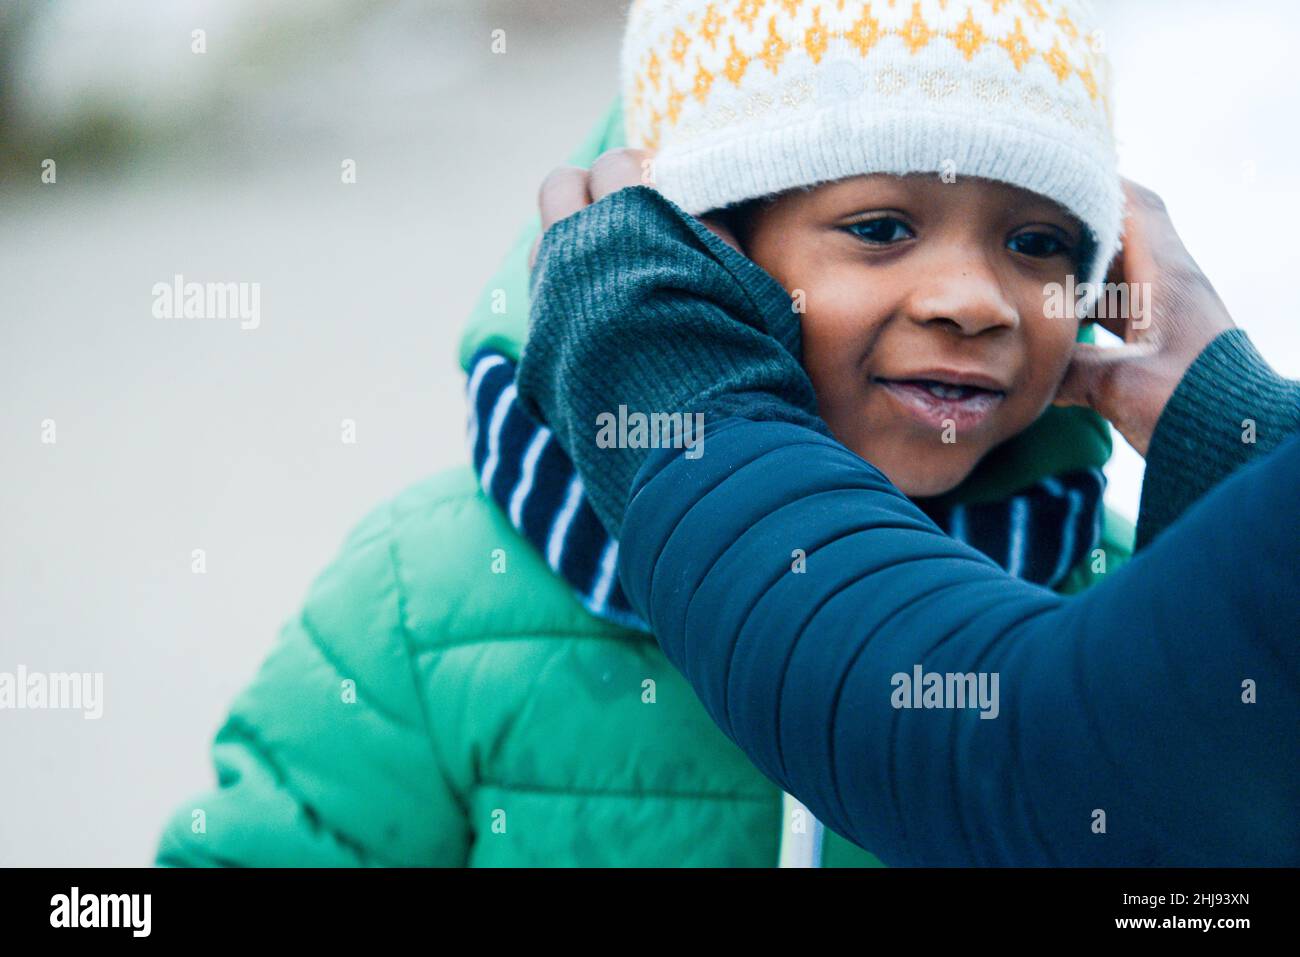 A cheerful African American preschooler boy in winter clothes and hands fixing his hat Stock Photo